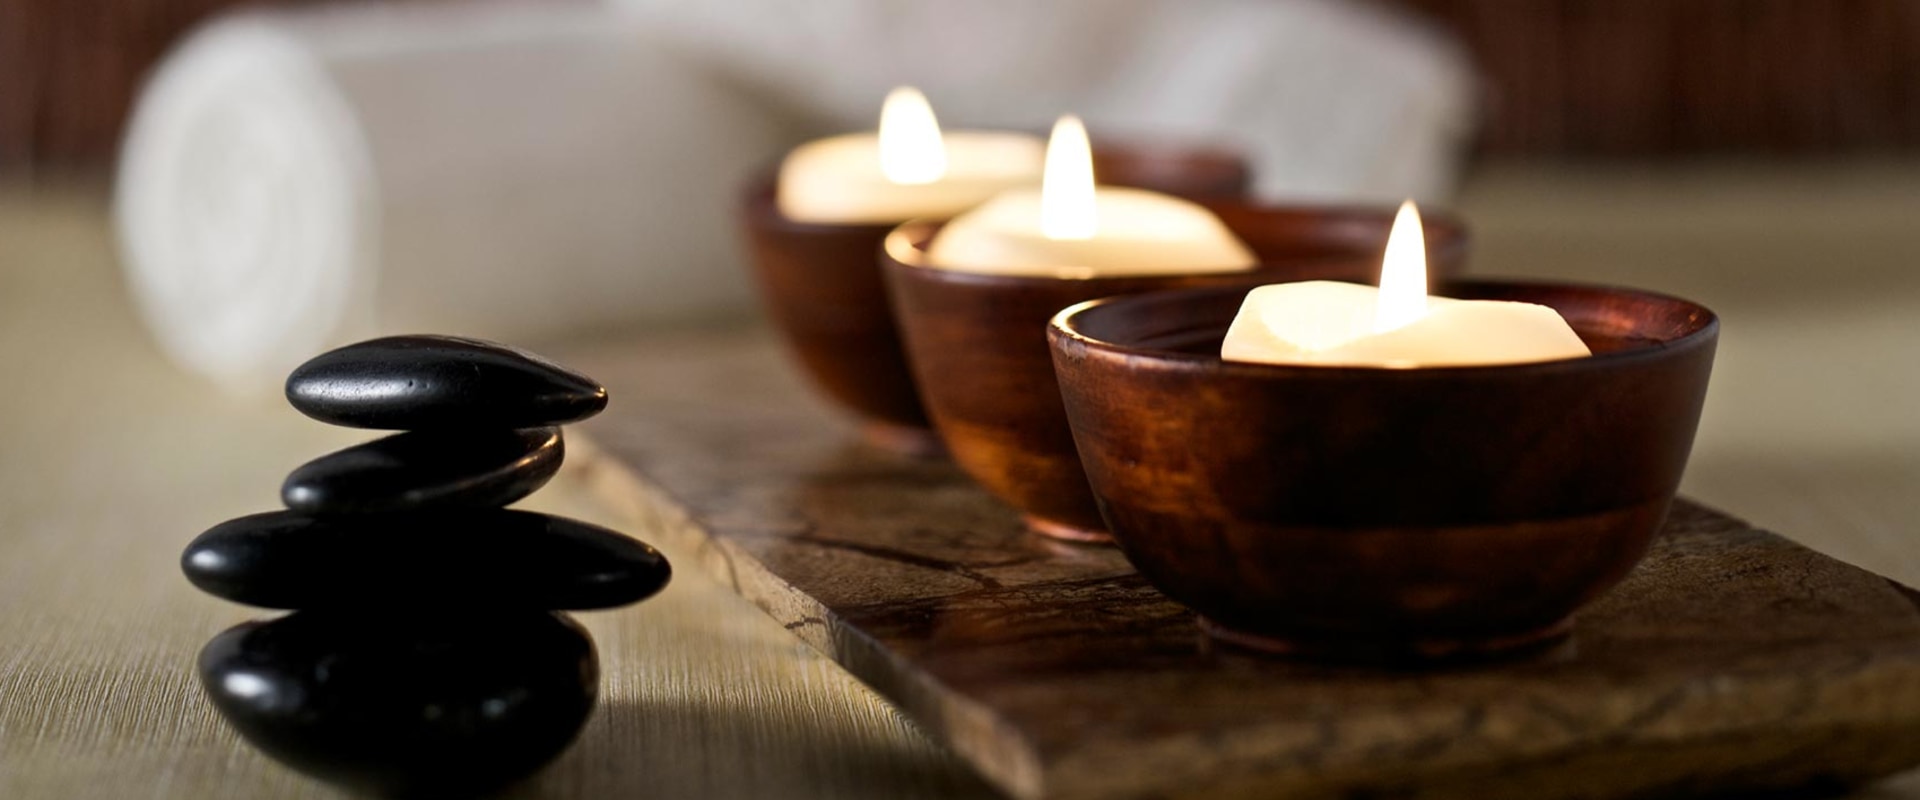 What are spa services?